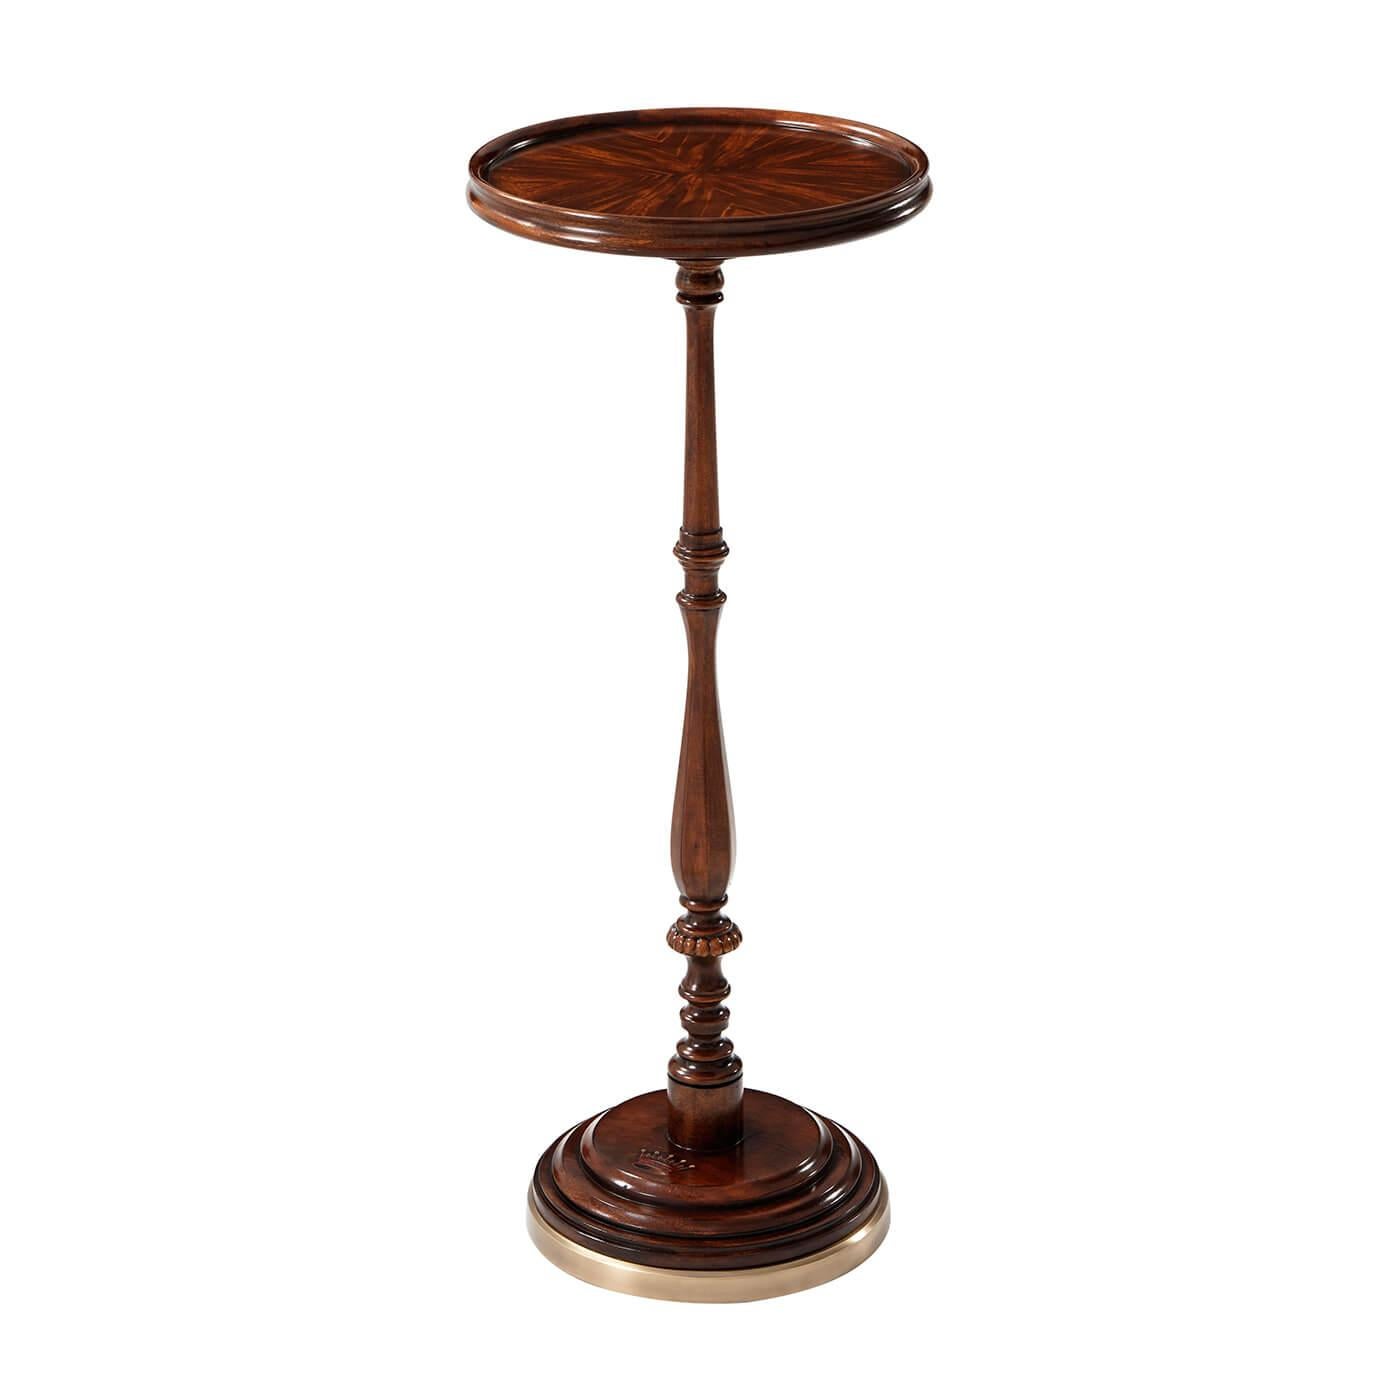 An English Georgian style mahogany candle stand, the circular molded edge top on a delicately turned baluster column terminating in a dished and molded circular brass bound platform base.

Dimensions: 11.5